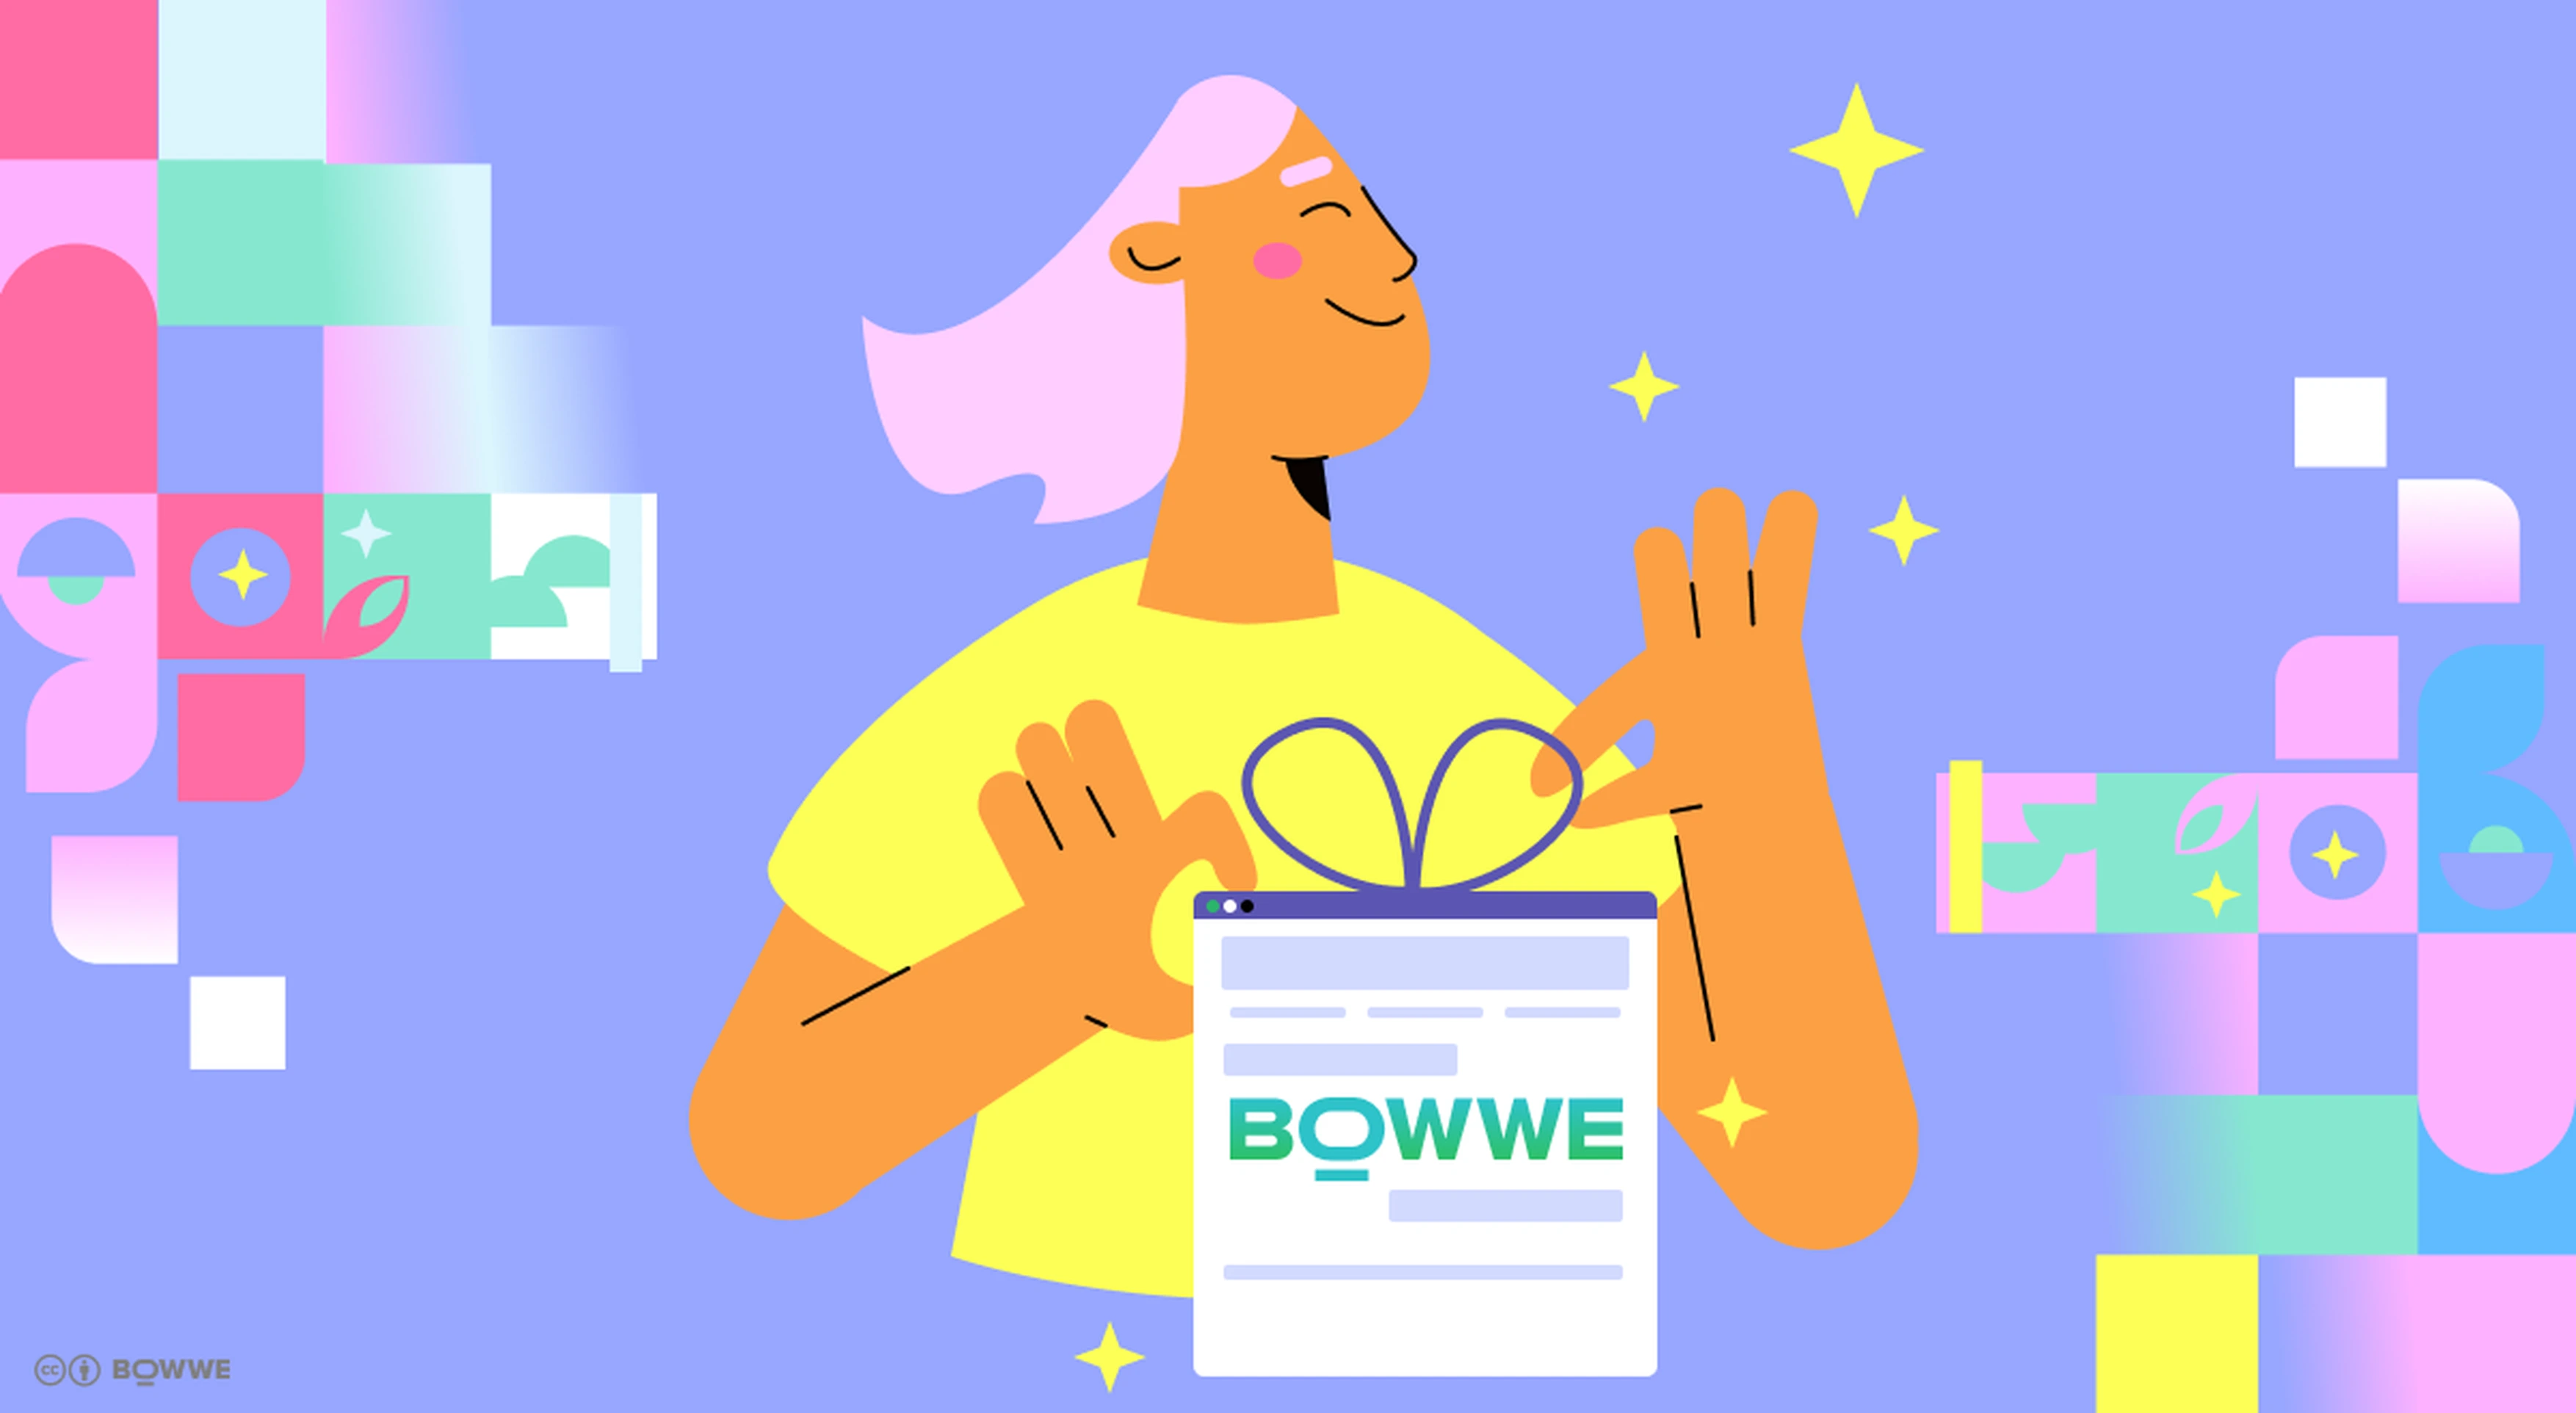 A girl with pink hair wearing a yellow T-shirt holding a gift with the BOWWE logo in front of her. 